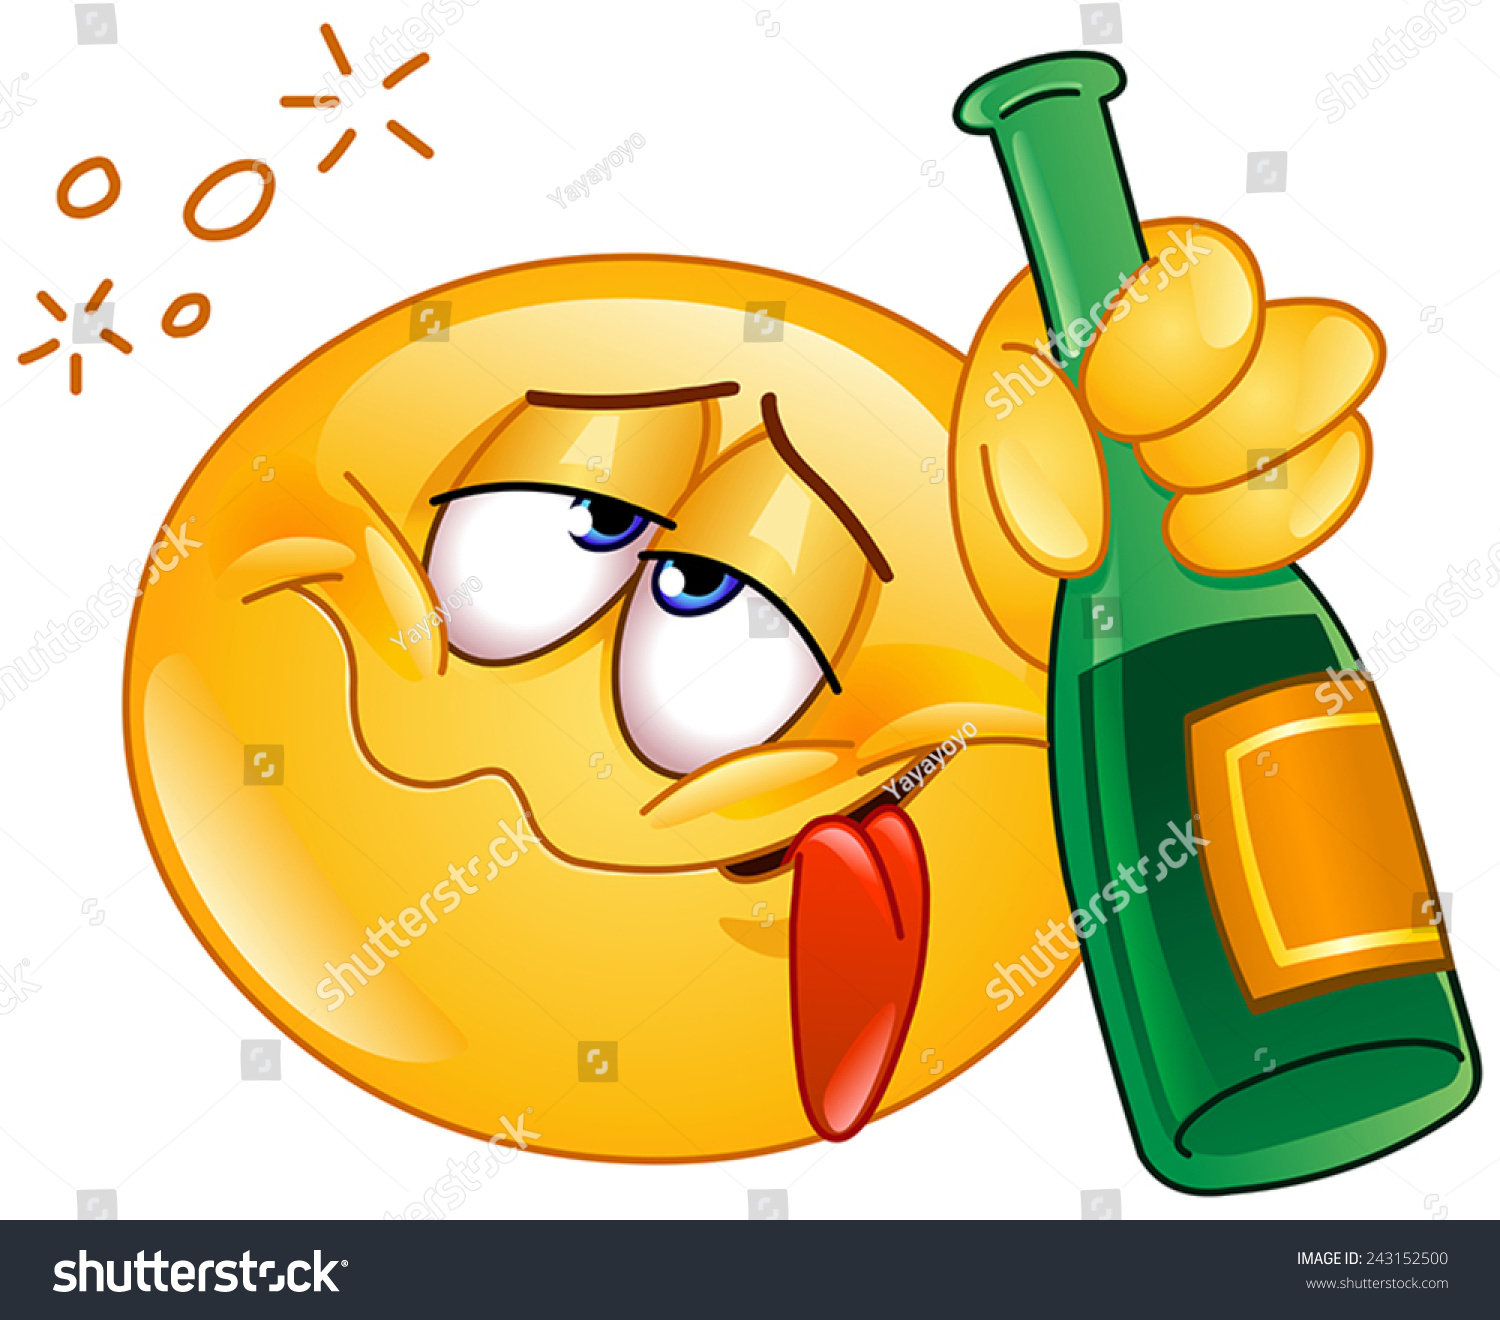 stock-vector-emoticon-holding-an-alcoholic-drink-bottle-243152500.jpg